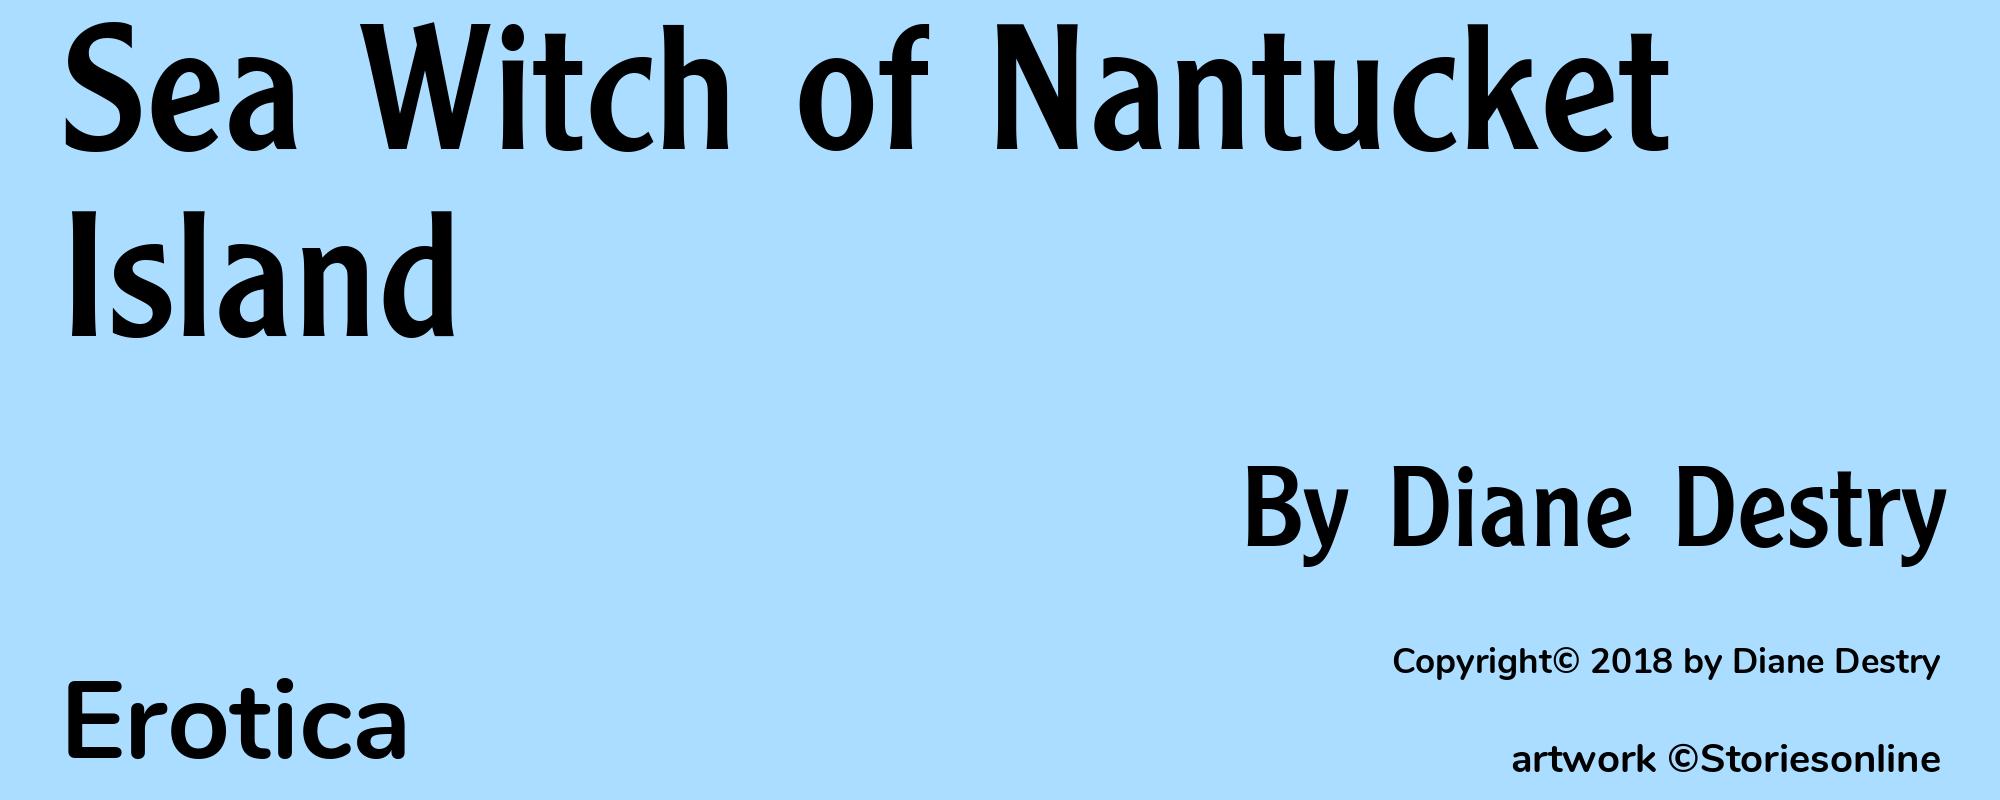 Sea Witch of Nantucket Island - Cover